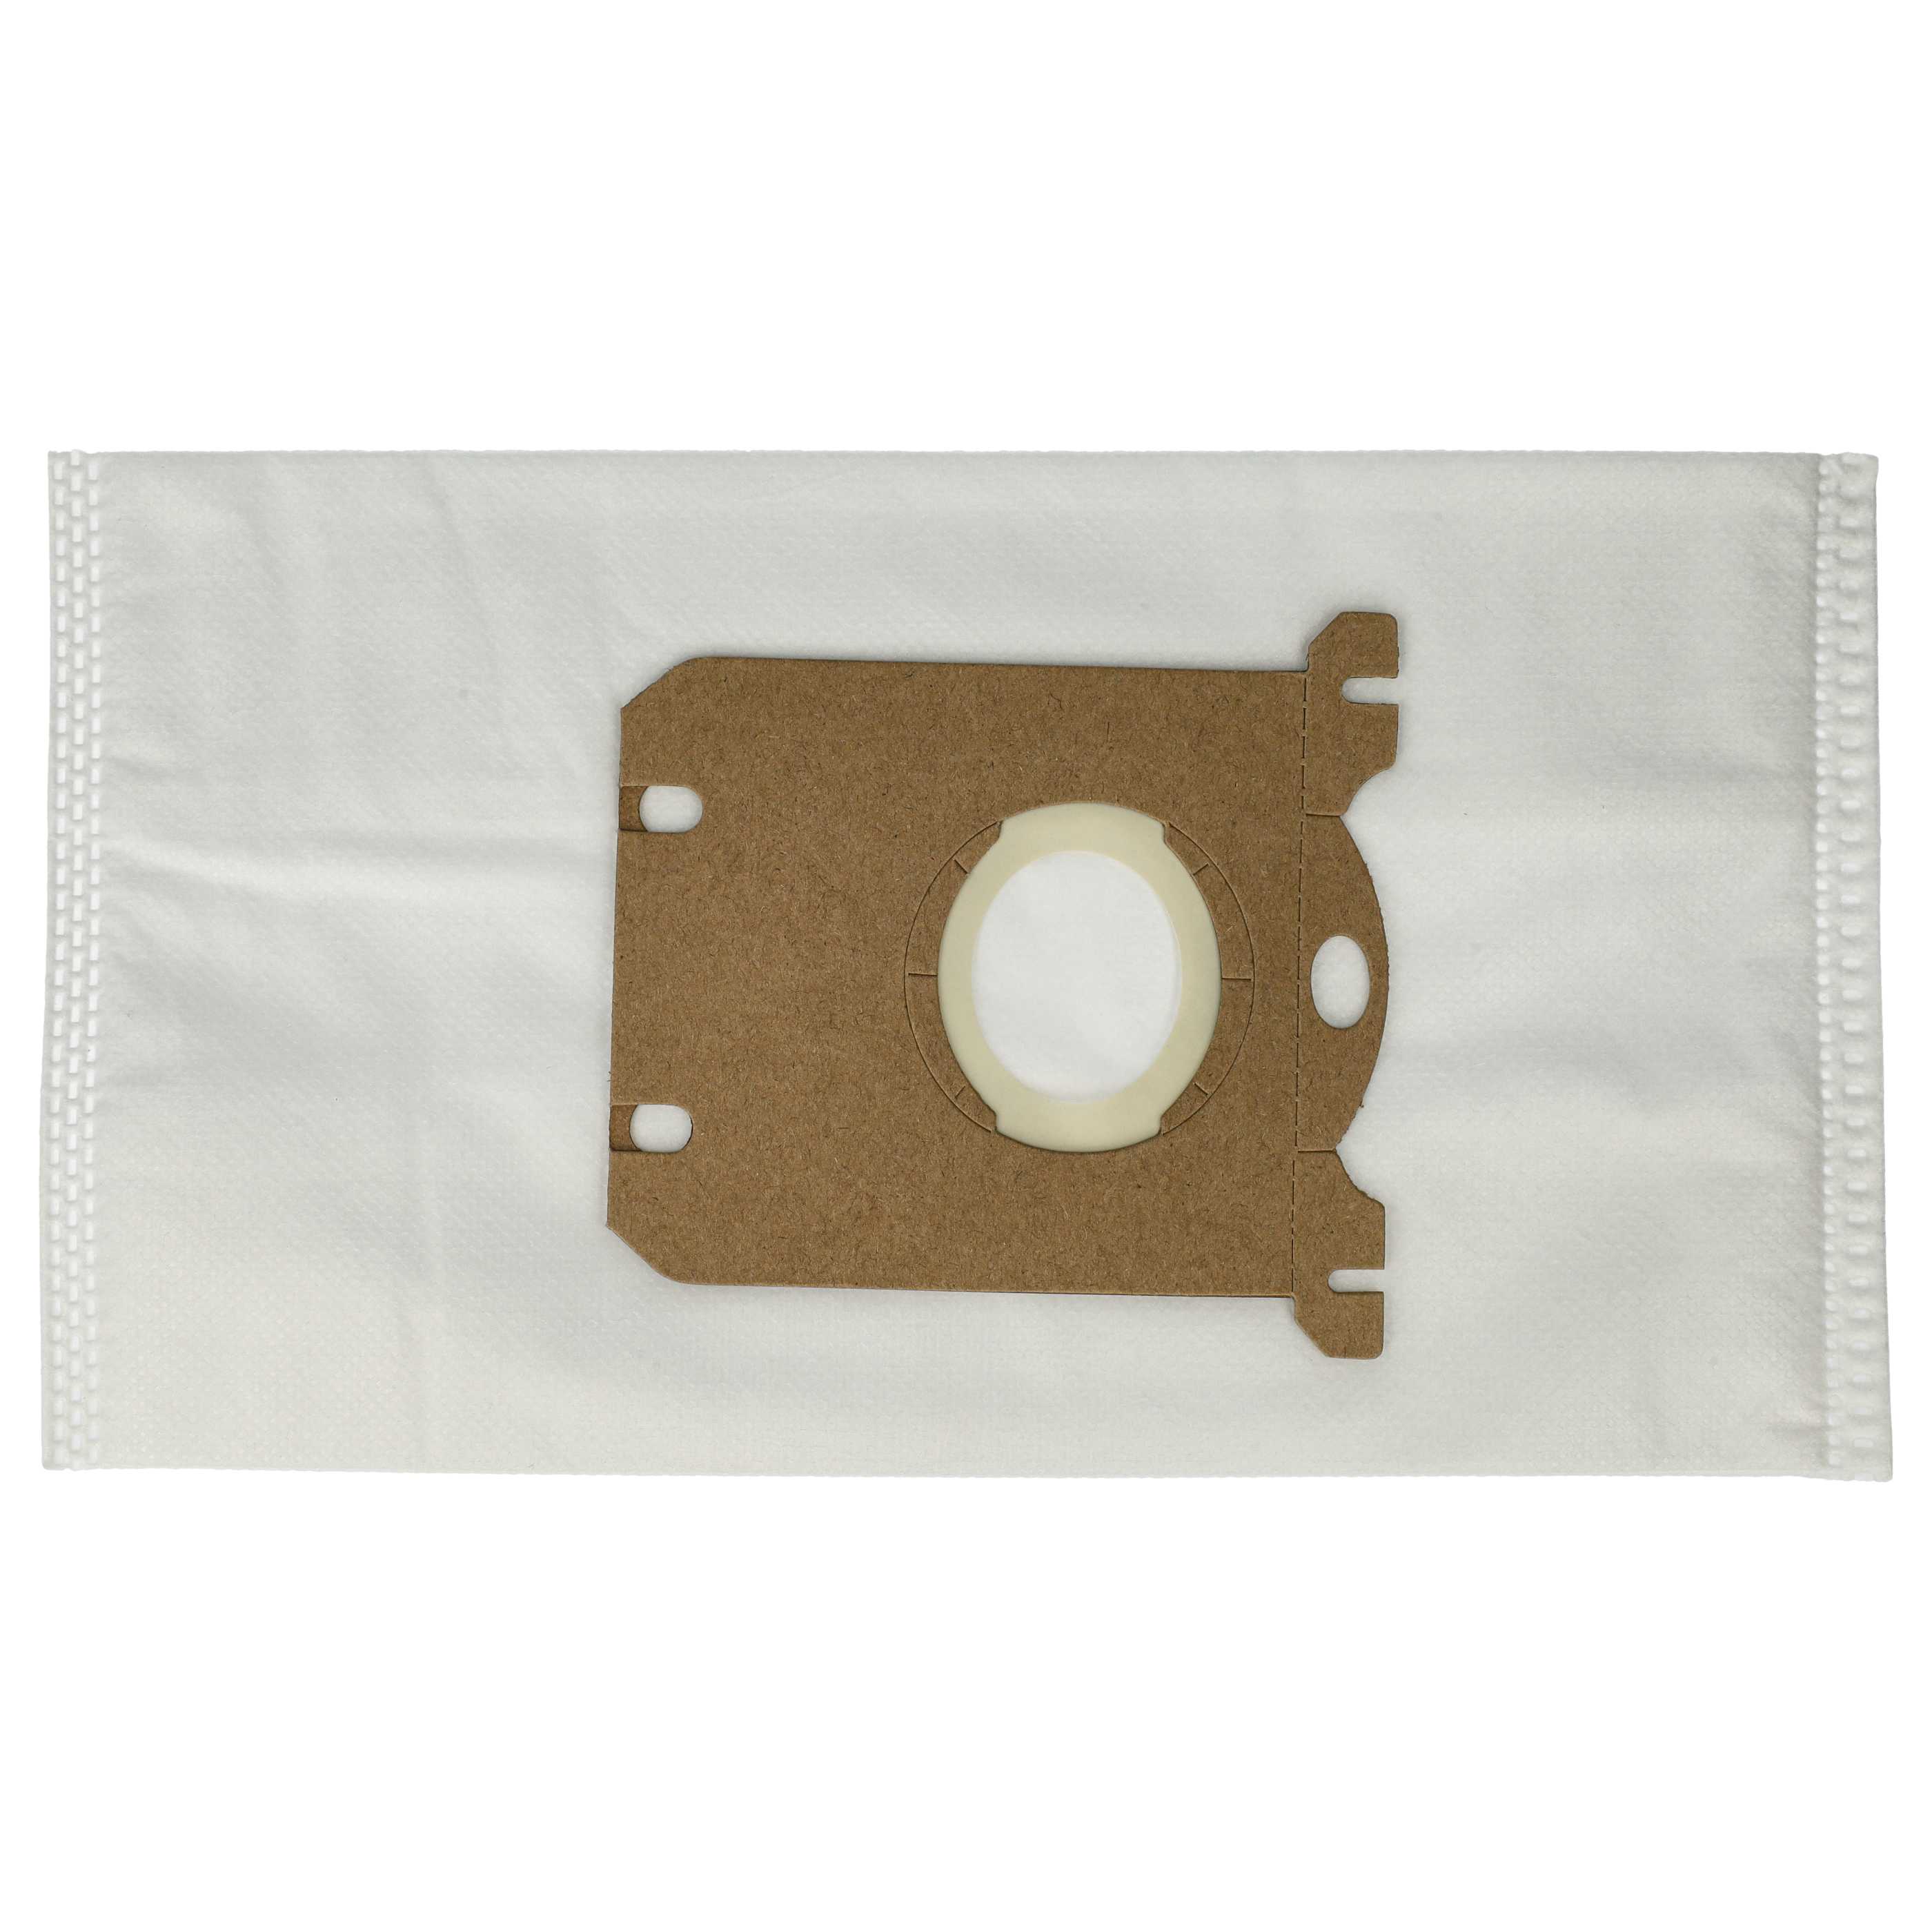 20x Vacuum Cleaner Bag replaces AEG 9001684753, GR203S, 900166039/9 for Philips - microfleece / cardboard